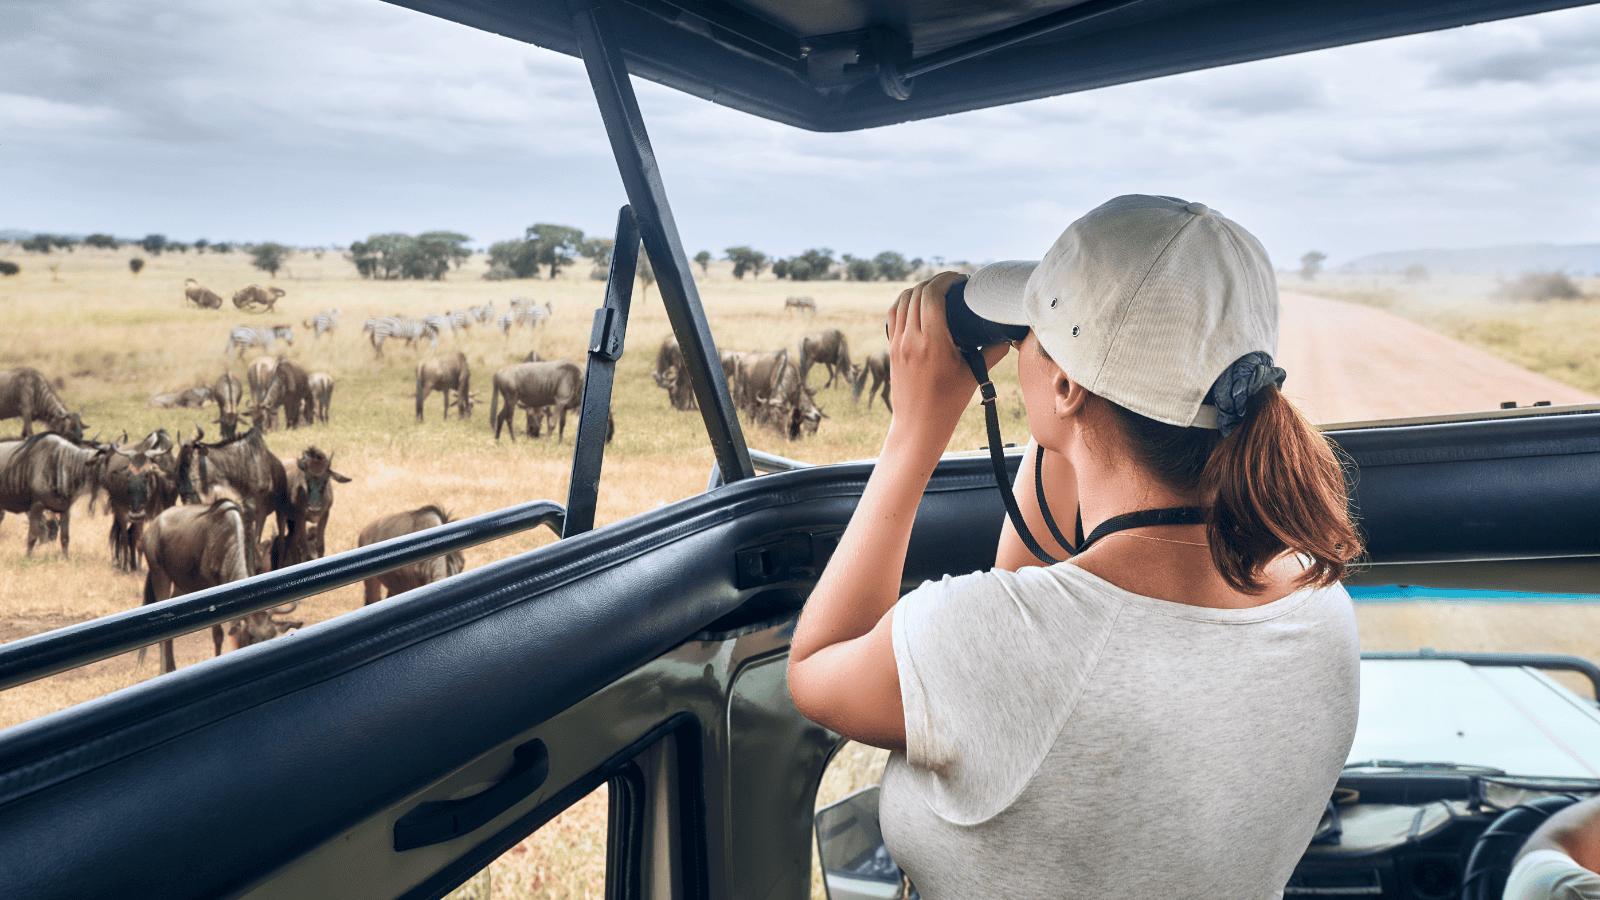 <p>Tap into your wild side on a fun-filled African safari to spot wildlife, admire rugged landscapes, and immerse yourself in local cultures. </p> <p>Exploring Africa’s plains, coastlines, and mountains is an experience you’ll never forget. Grab your favorite travel companion or head out solo on one of these thrilling bucket list African safaris. </p>